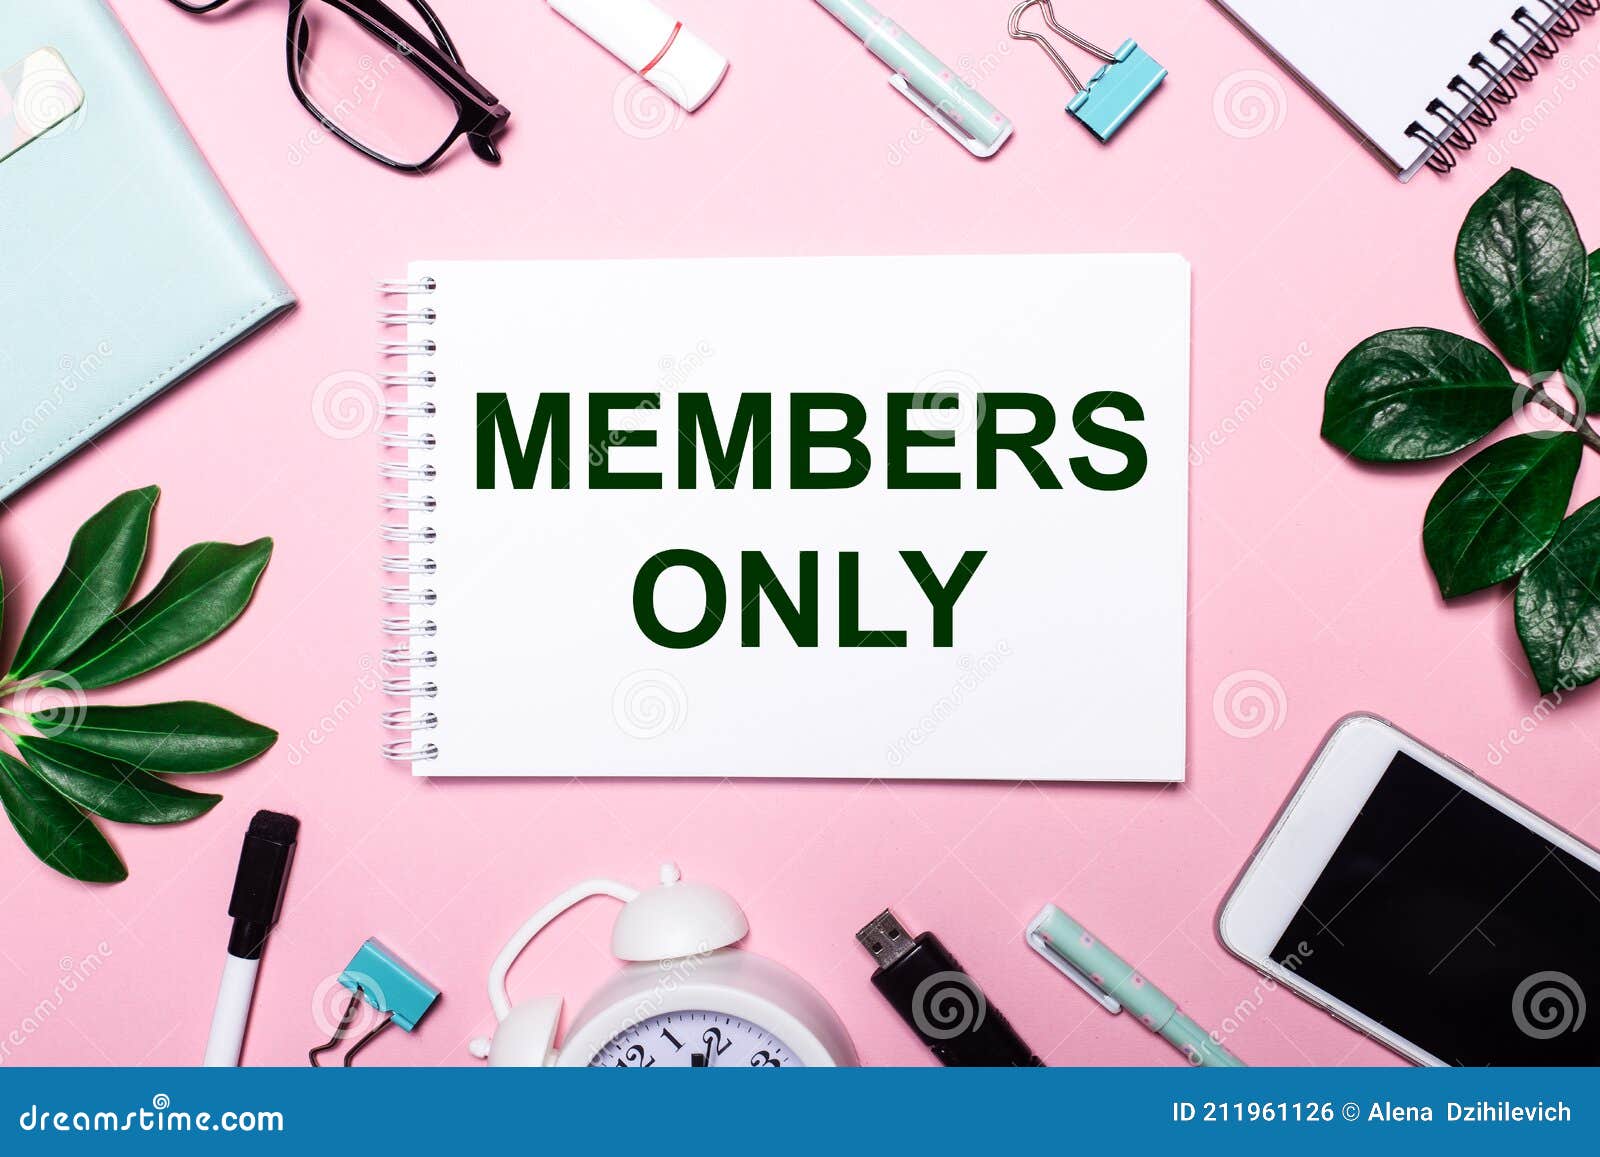 members only is written in a white notebook on a pink background surrounded by business accessories and green leaves